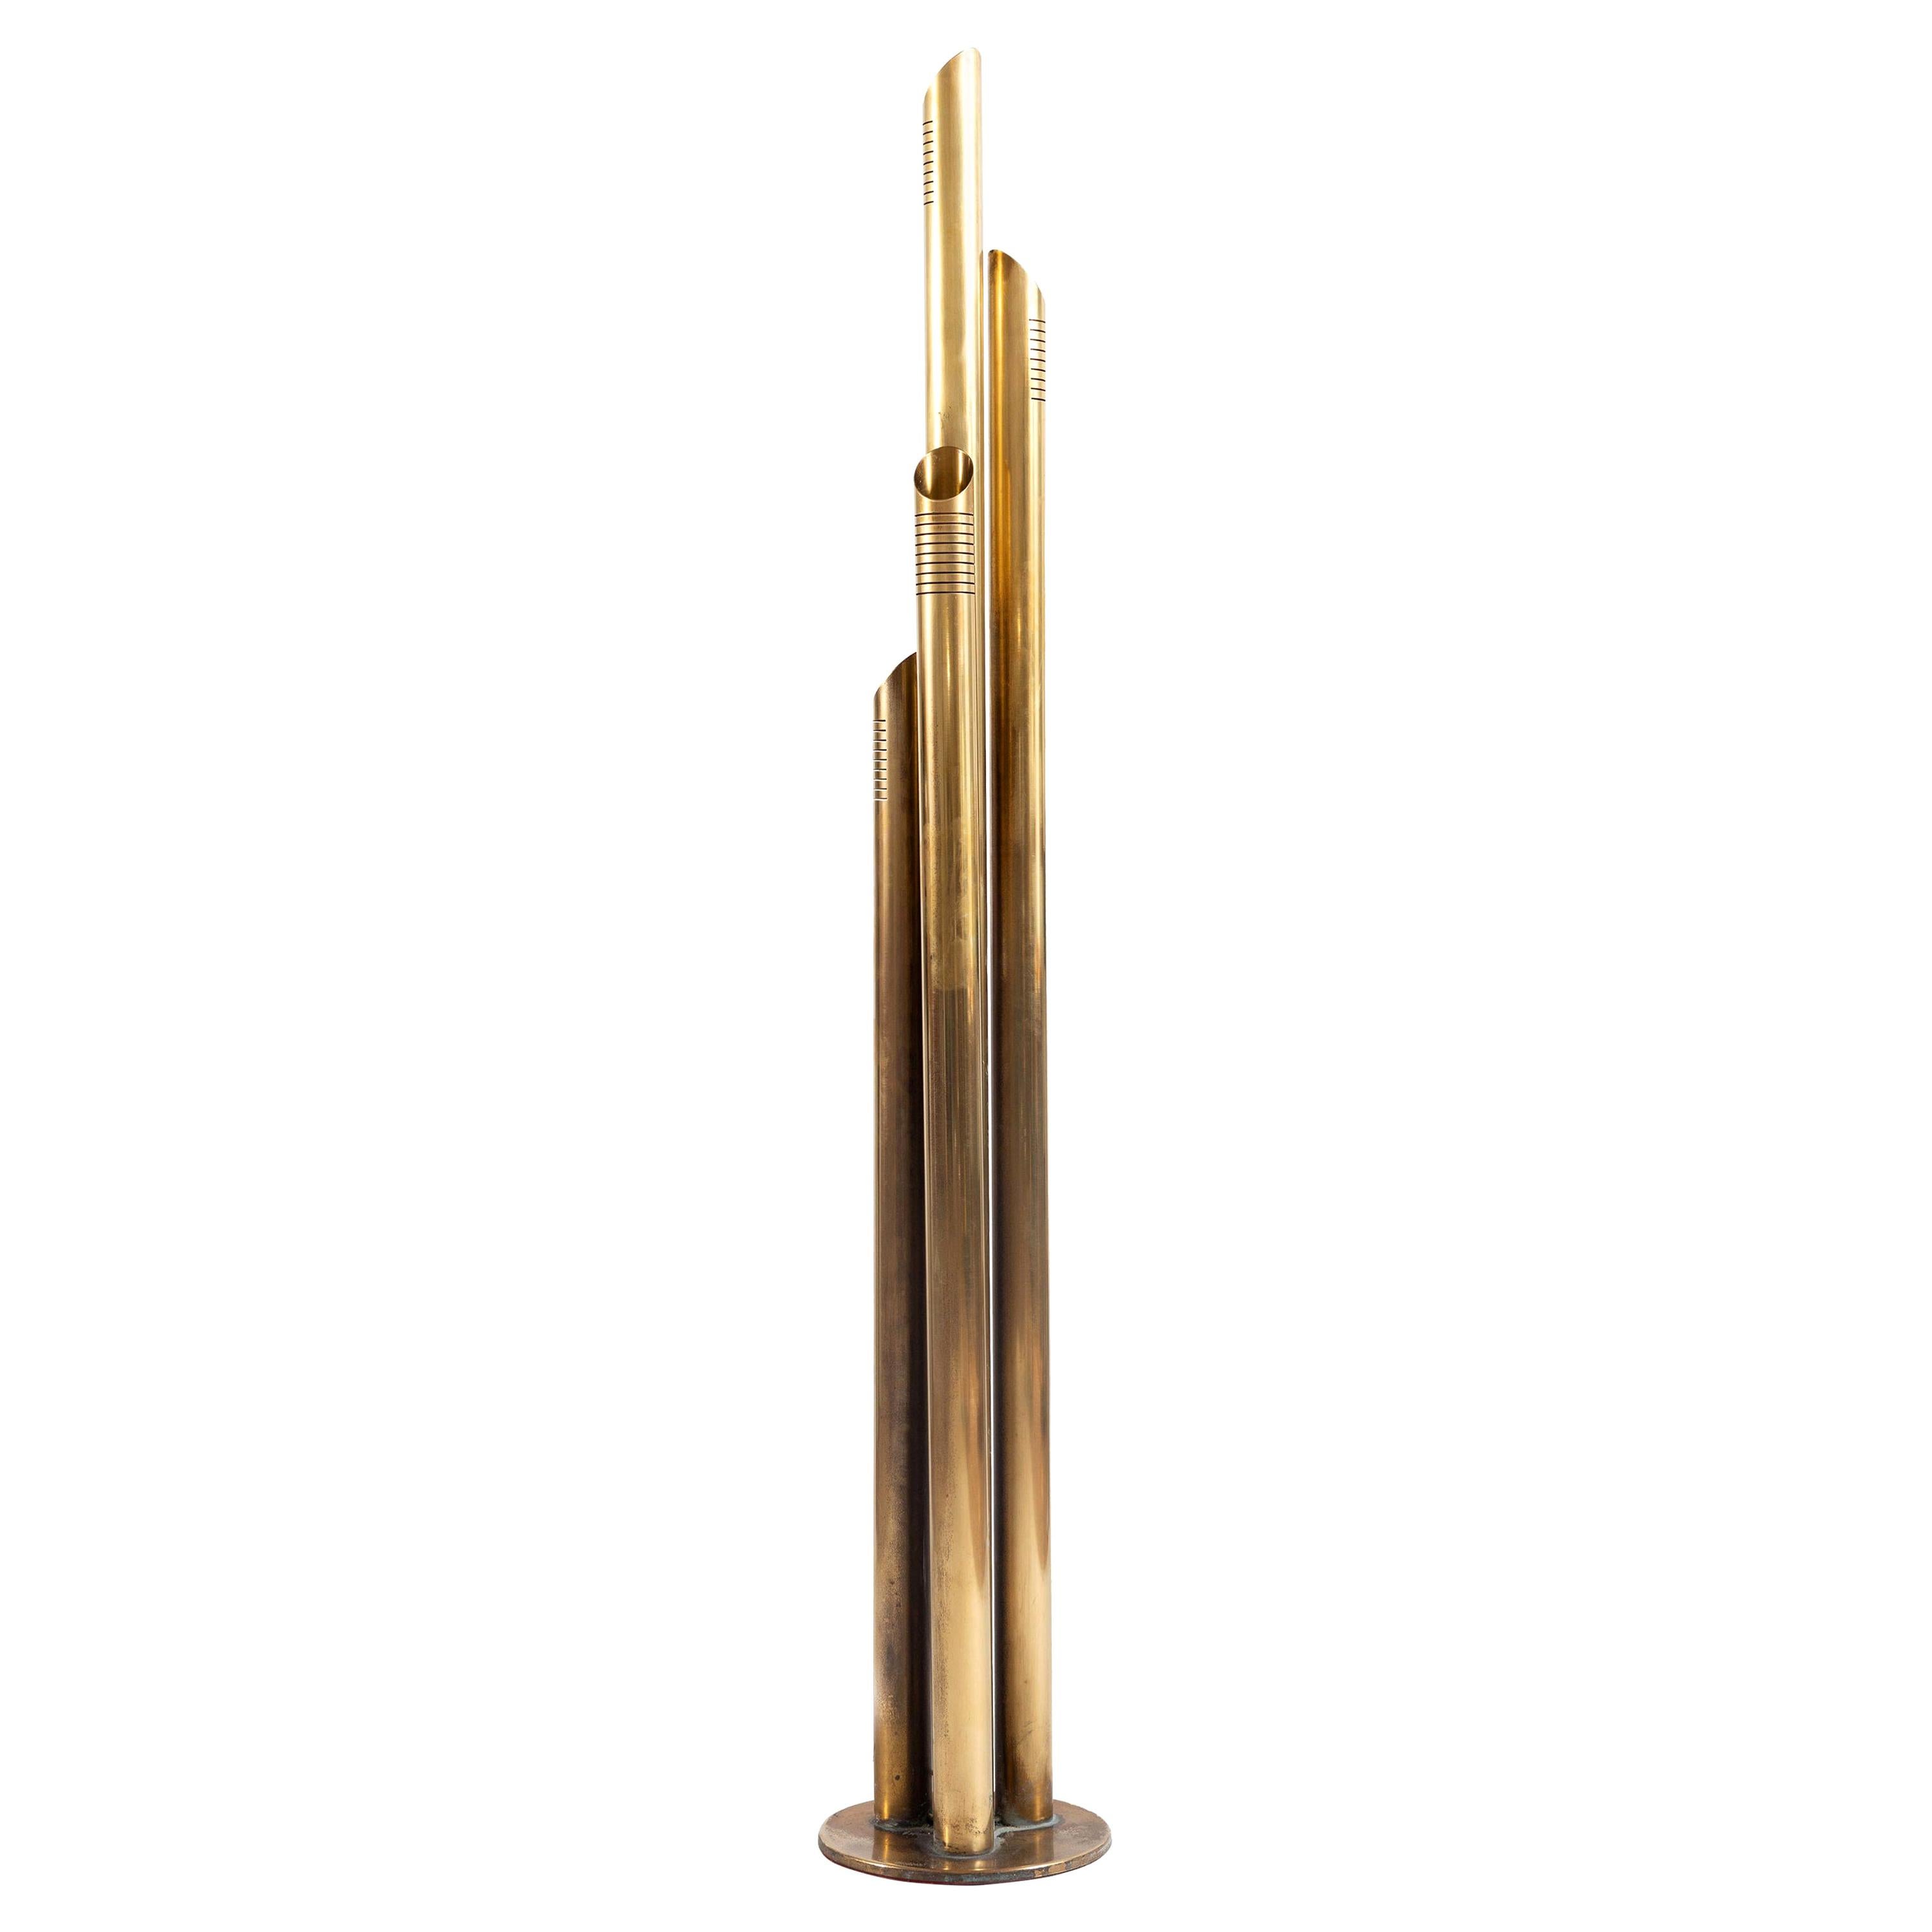 Italian Solid Brass Tube Floor Lamp Designed by R. Fontana, circa 1970 For Sale